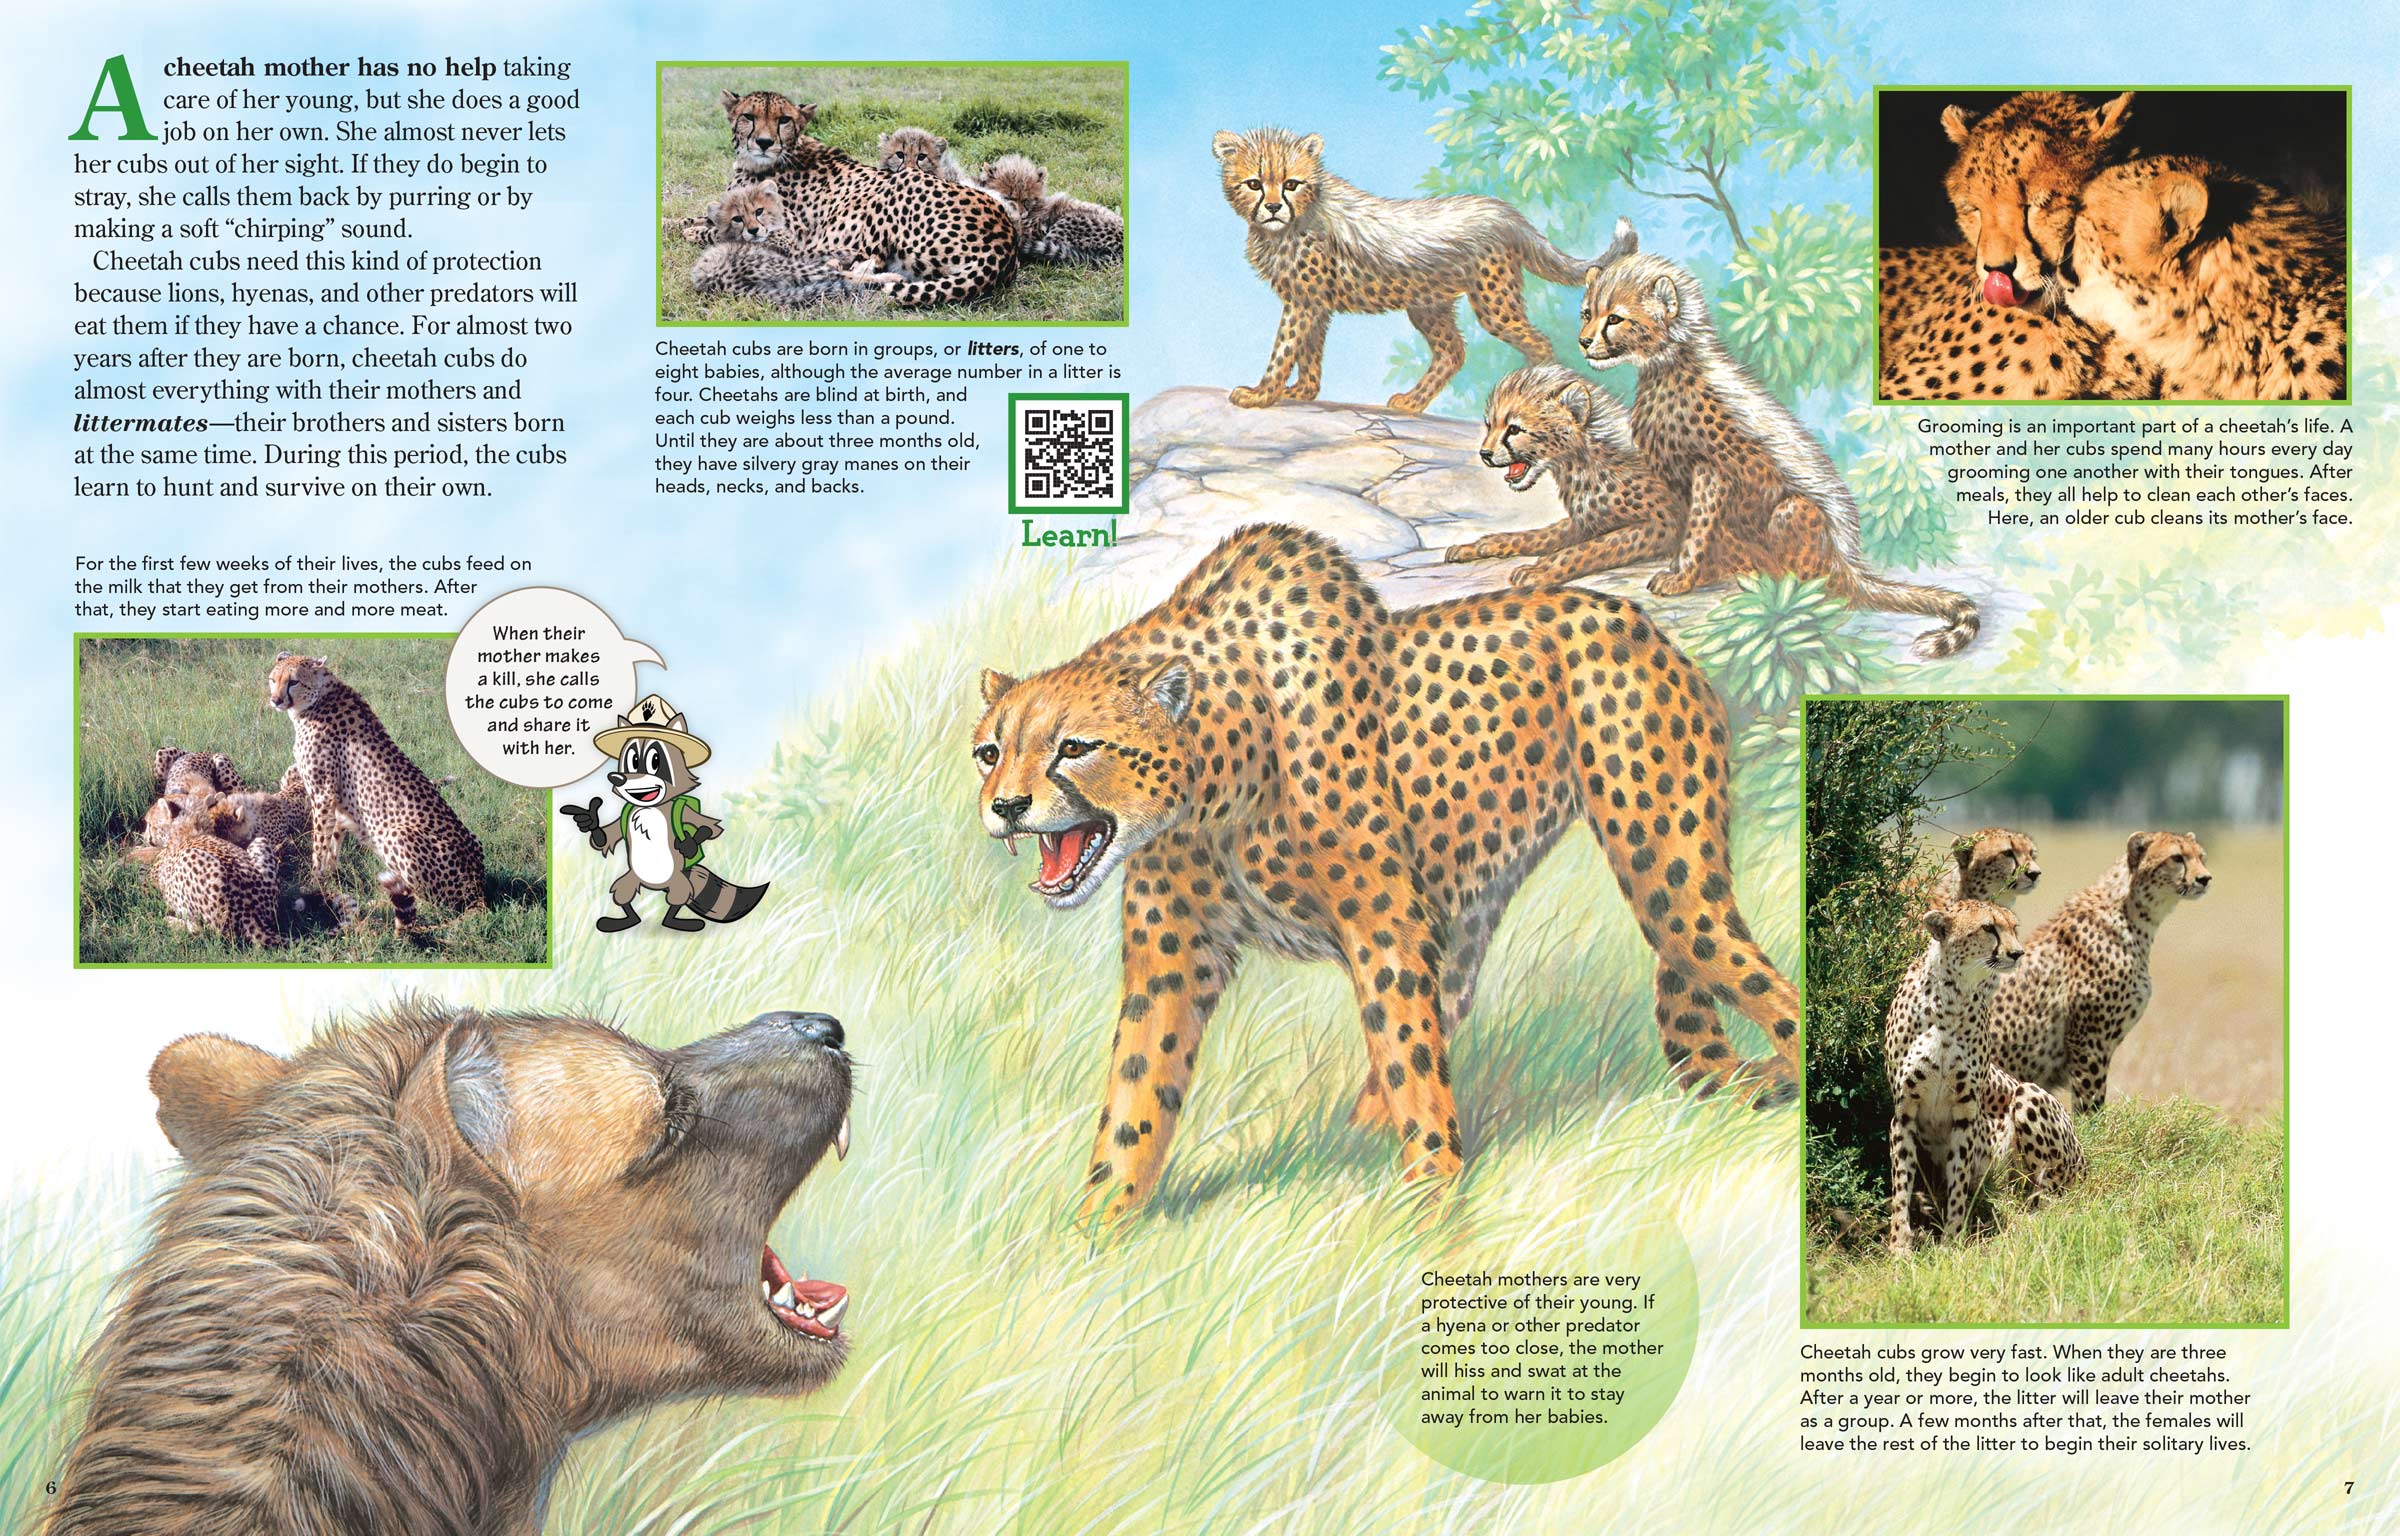 Pages 6&7 of Zoobooks Cheetahs, showing a cheetah confronting a hyena to protect her cubs.